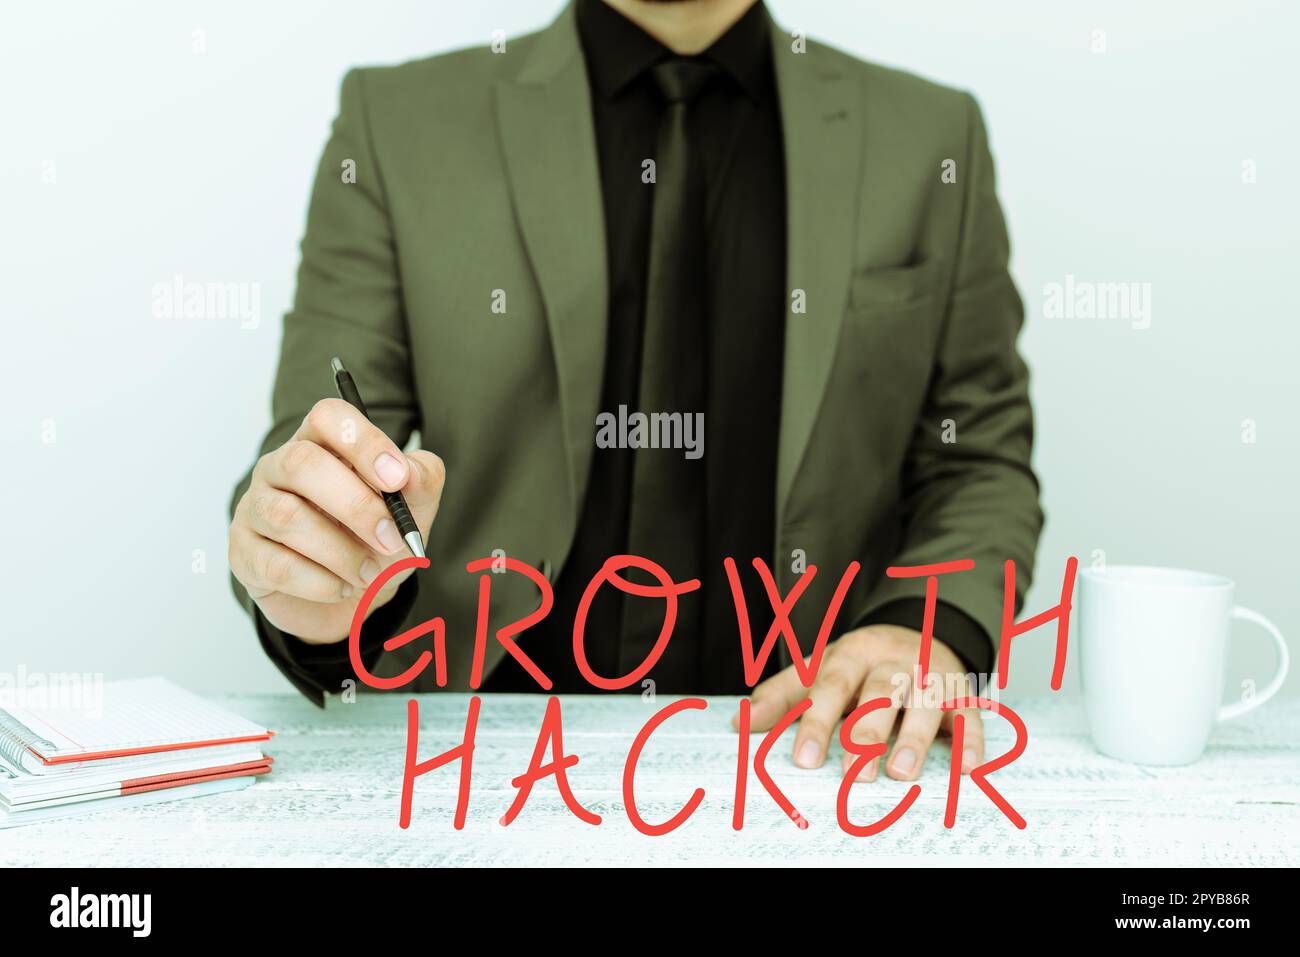 Writing displaying text Growth Hacker. Business approach generally to acquire as many users or customers as possible Stock Photo